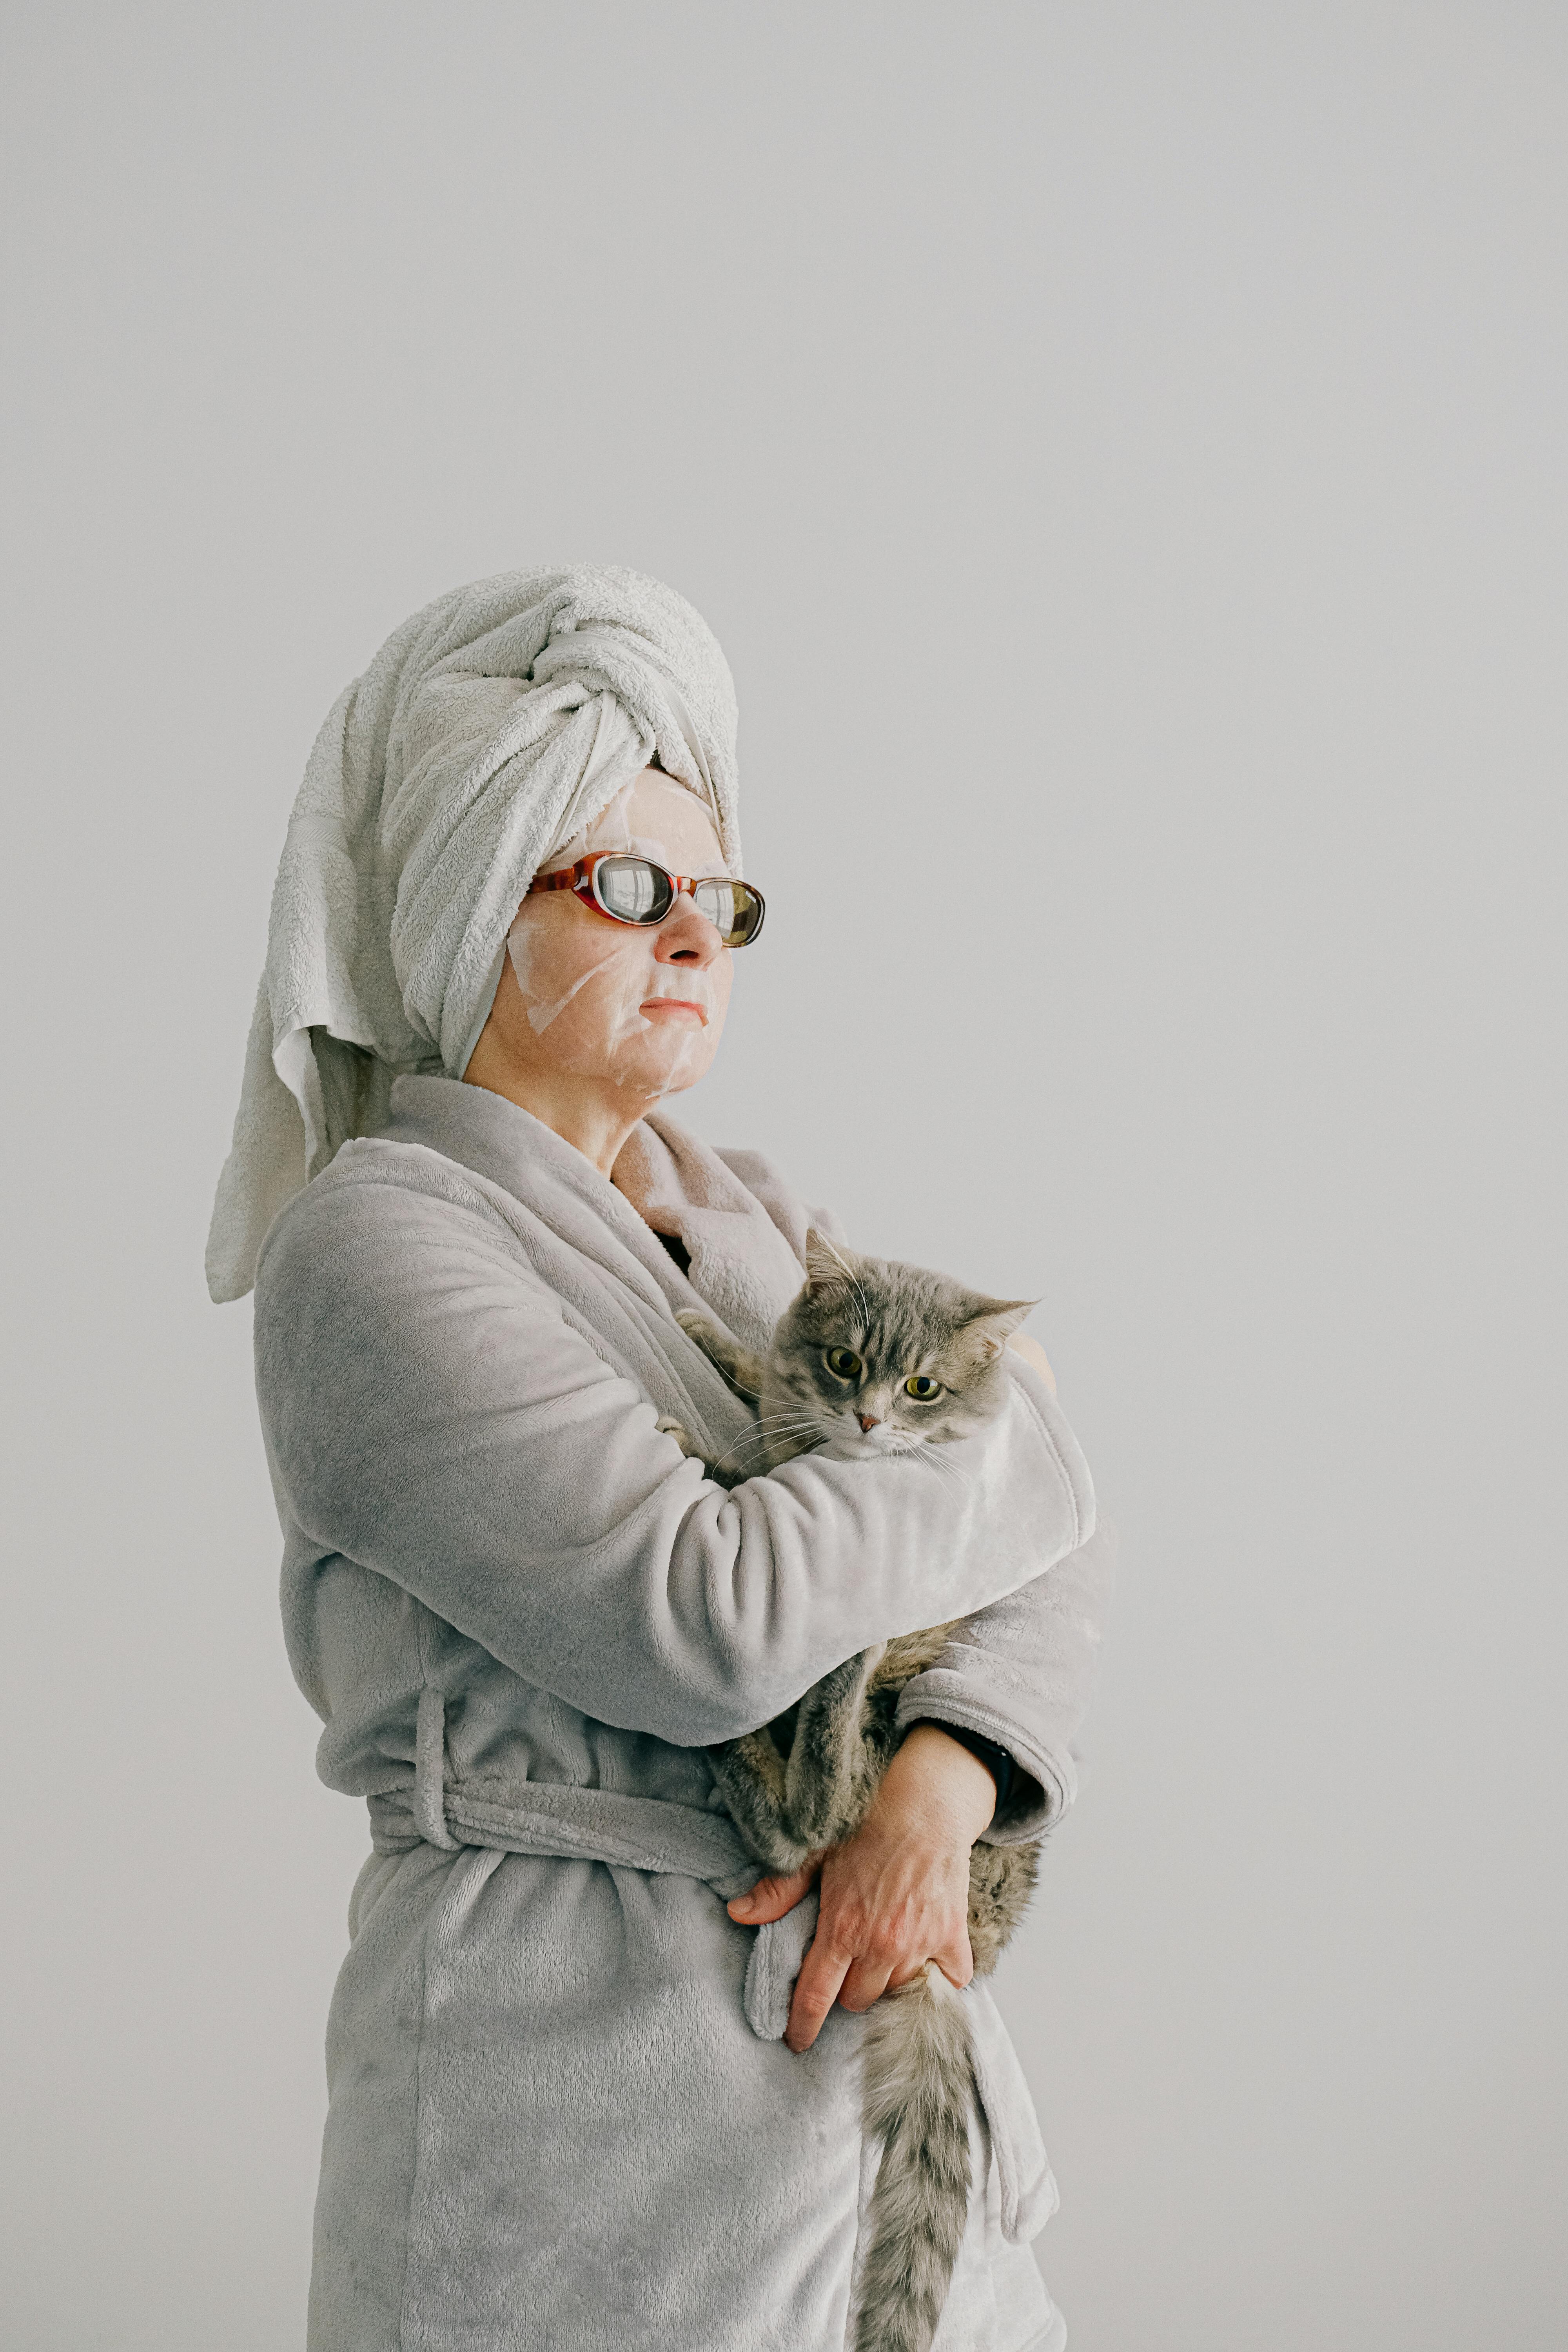 An arrogant woman dressed in a gown, and sunglasses while holding a cat | Source: Pexels